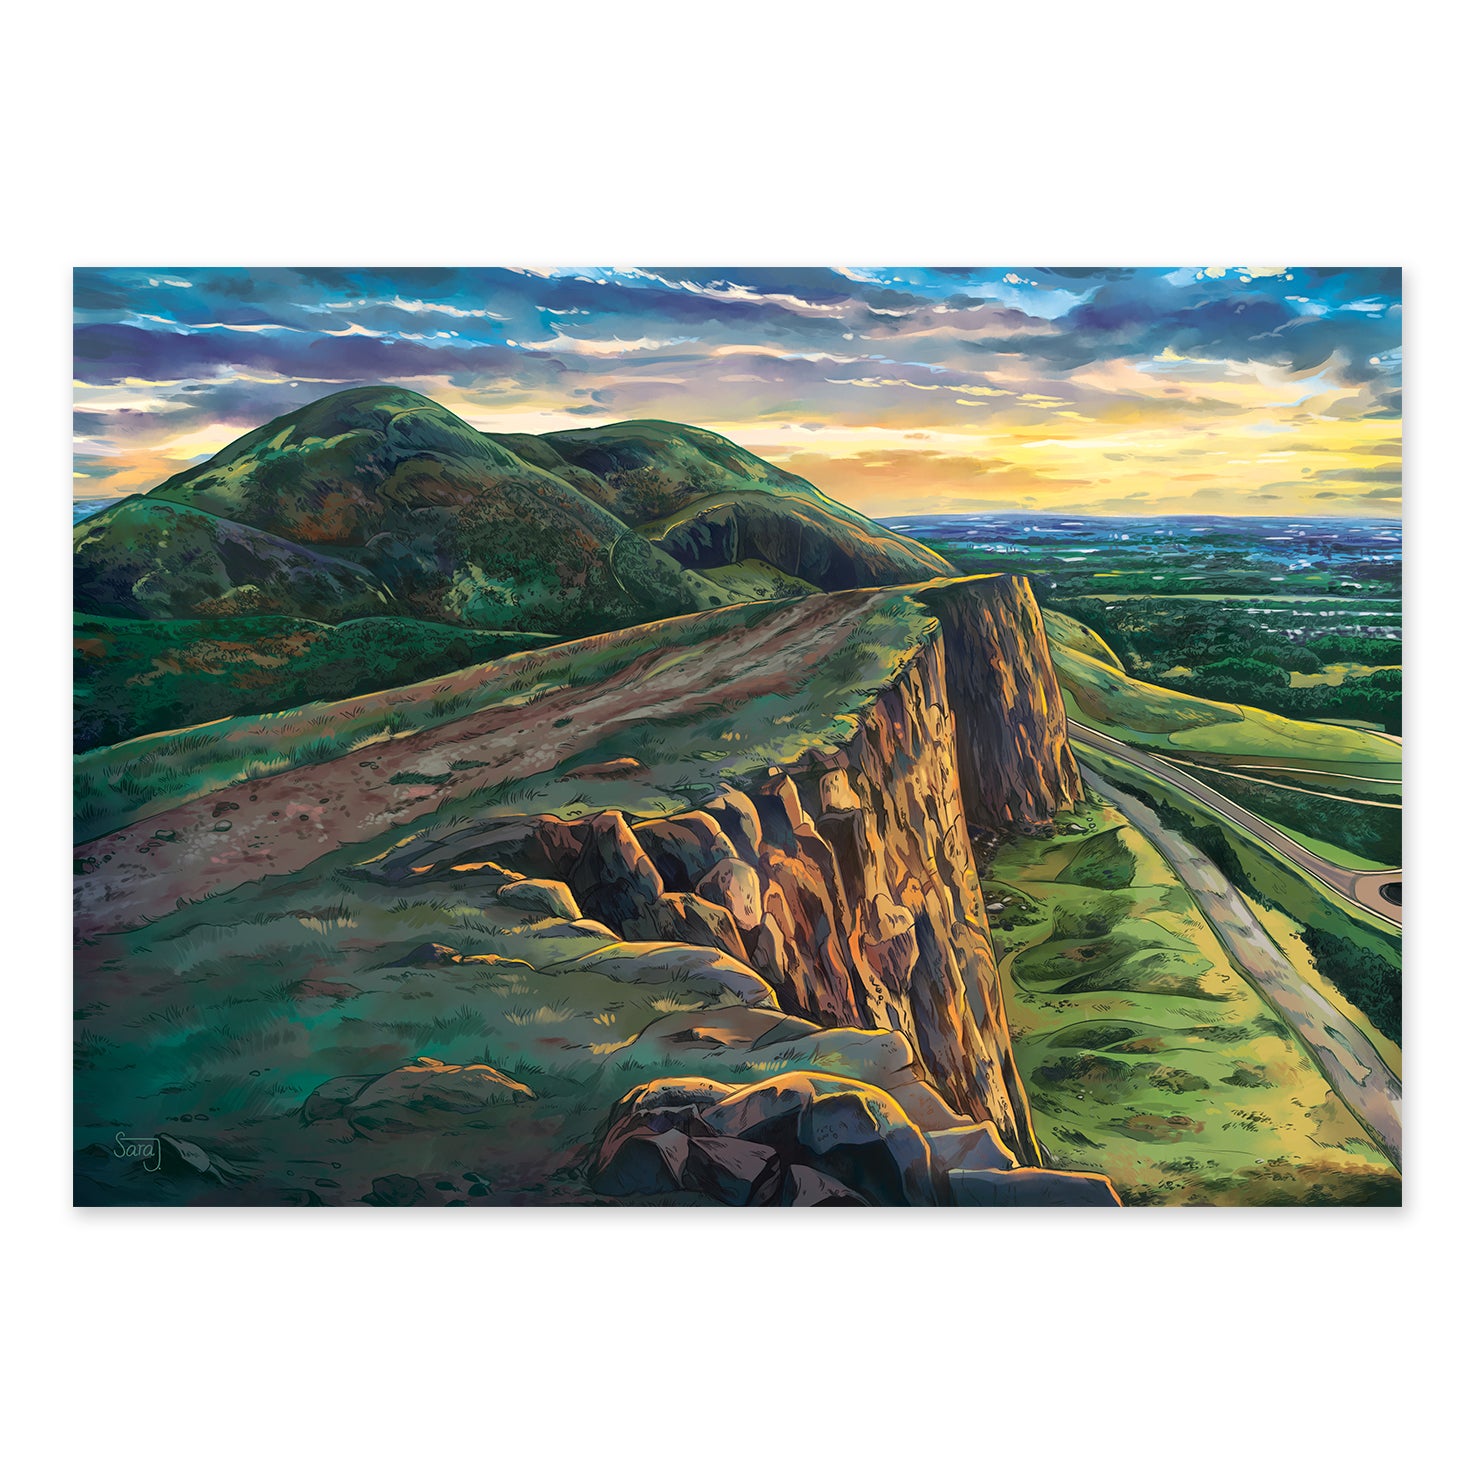 Art Print of Arthur's Seat from Northern point of view.